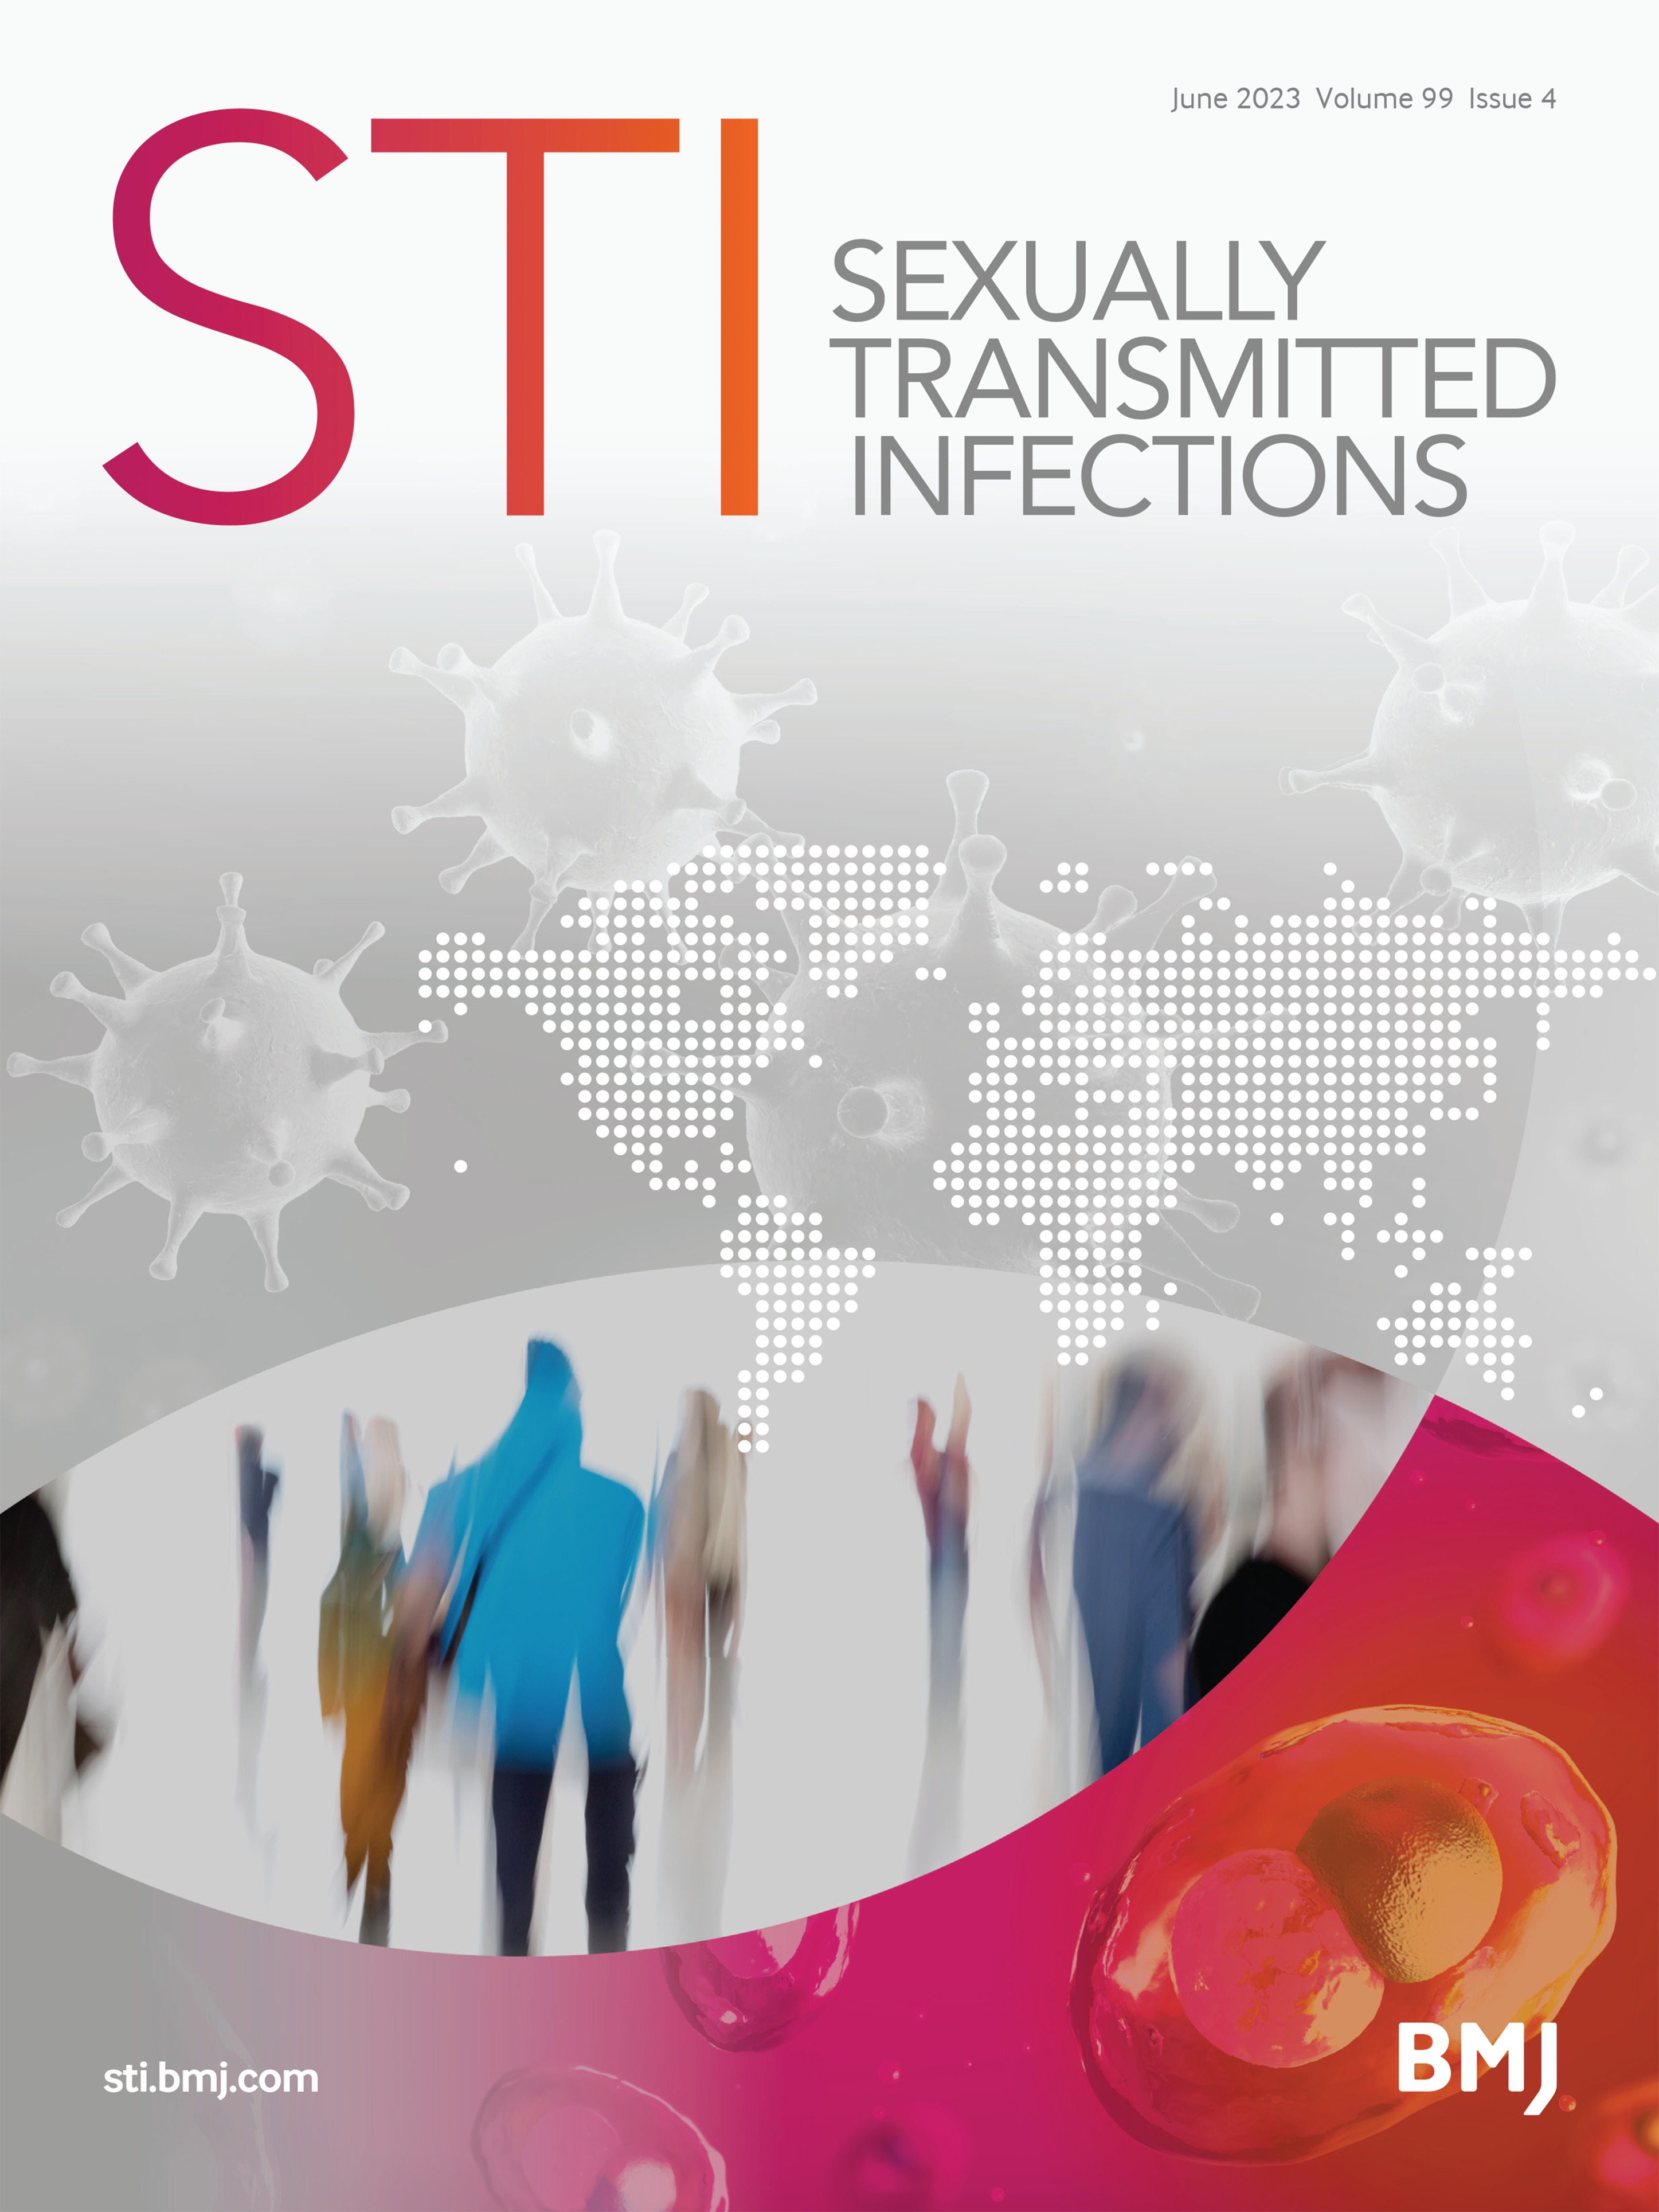 Changes in STI and HIV testing and testing need among men who have sex with men during the UKs COVID-19 pandemic response